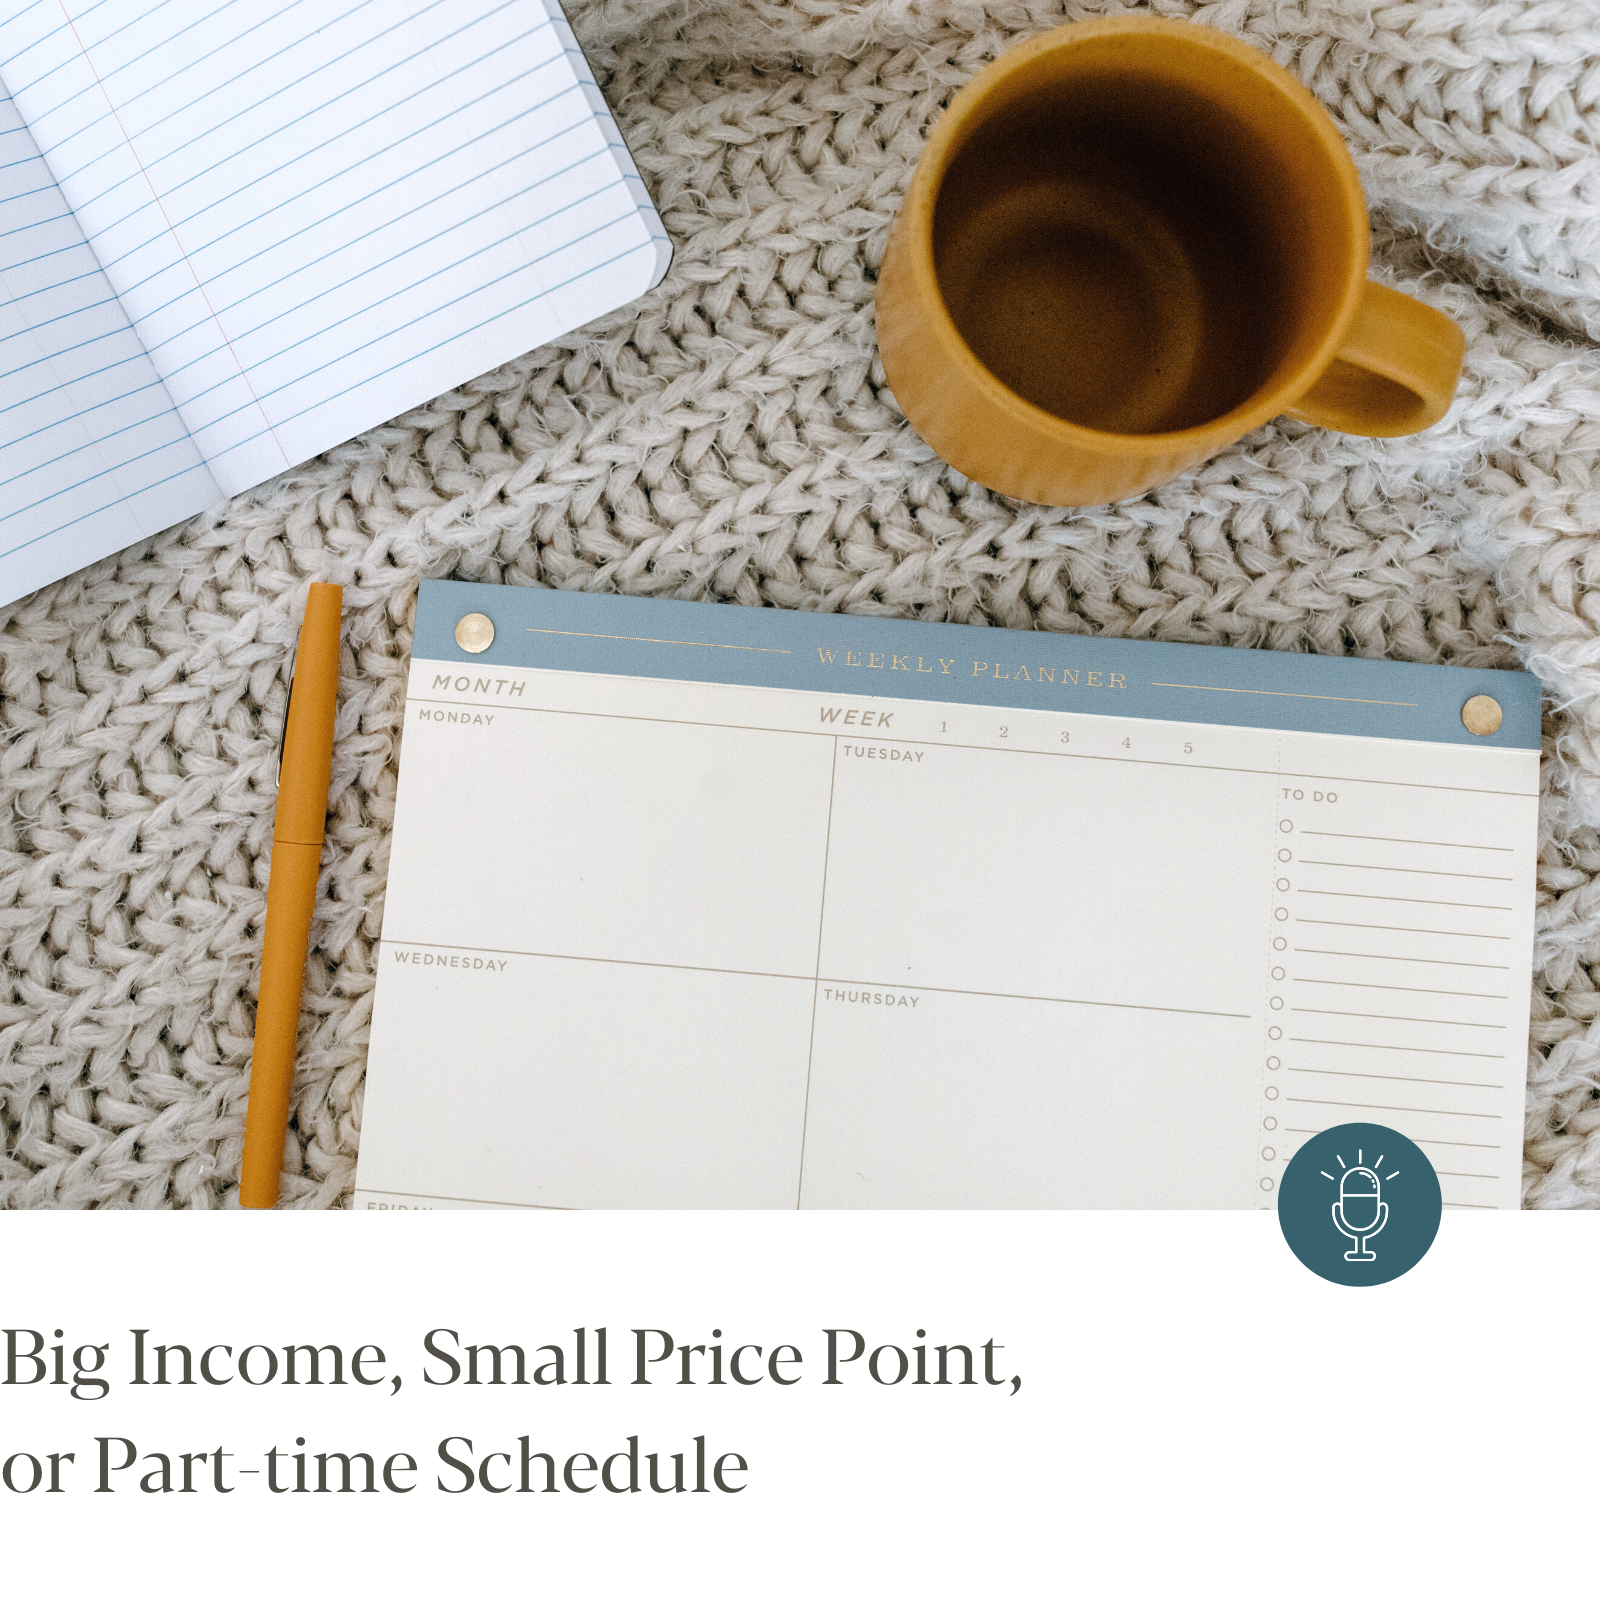 Episode #225 - Big Income, Small Price Point, or Part-time Schedule